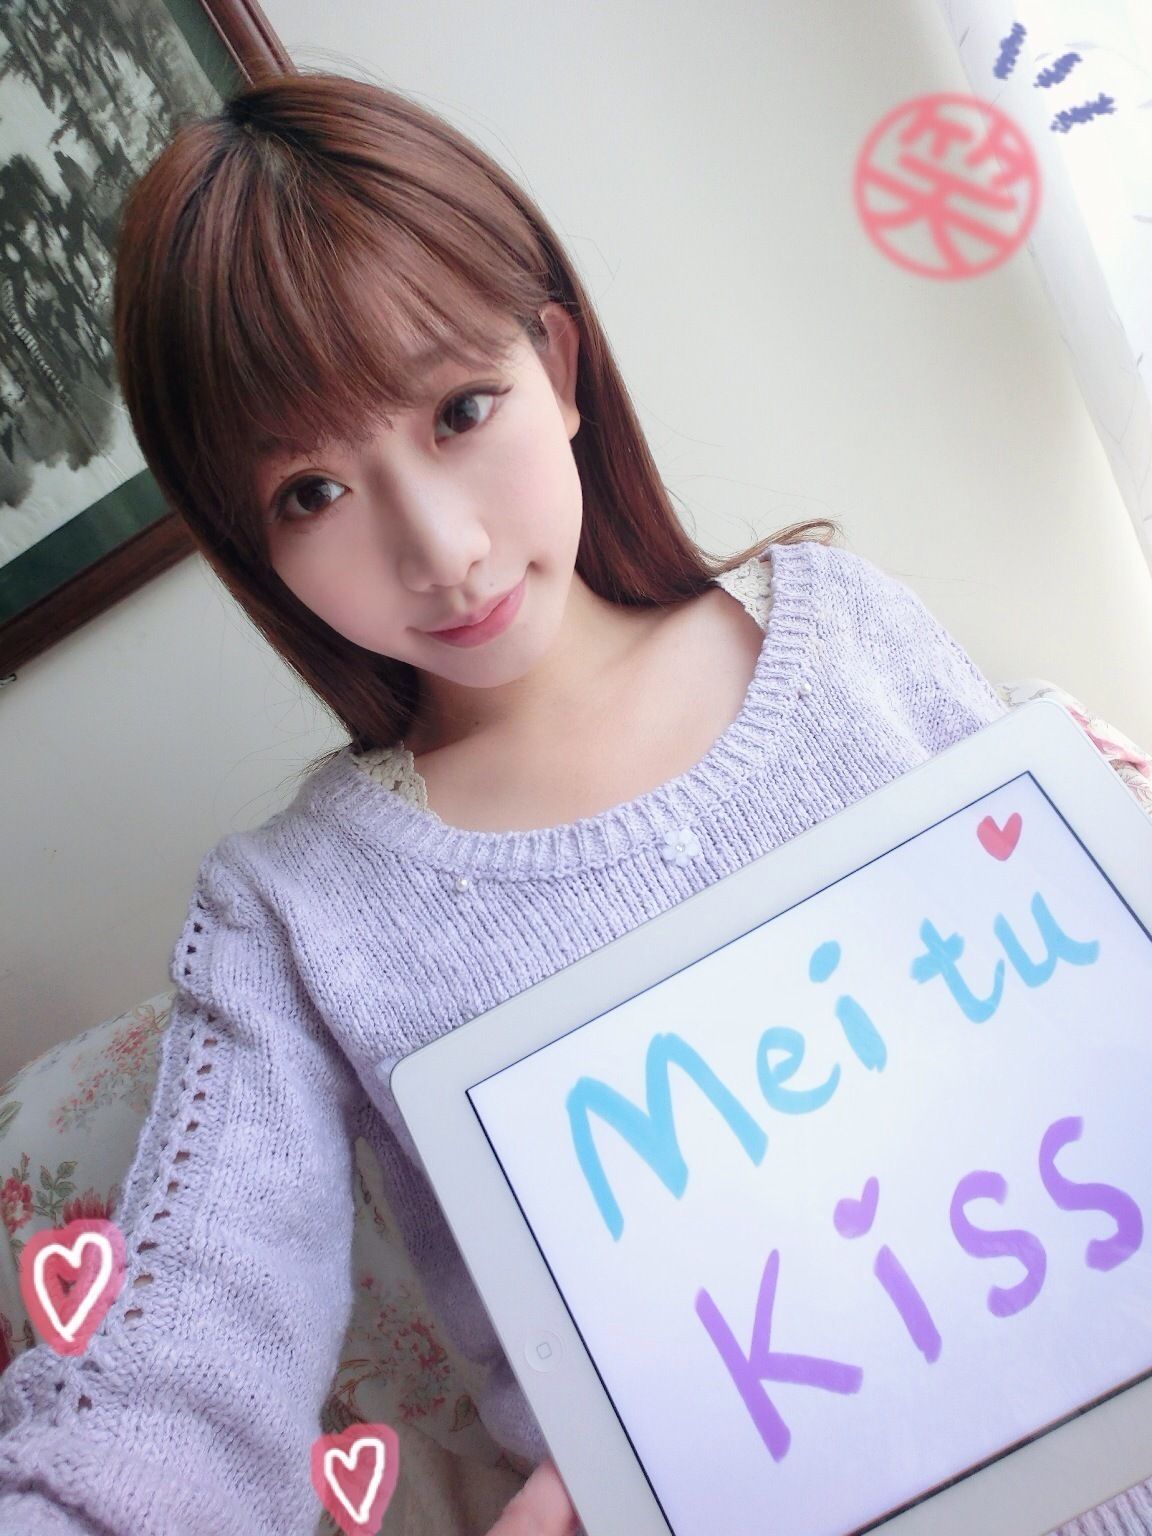 Chen Wei “personal life photo, microblogging picture” 2nd photo collection